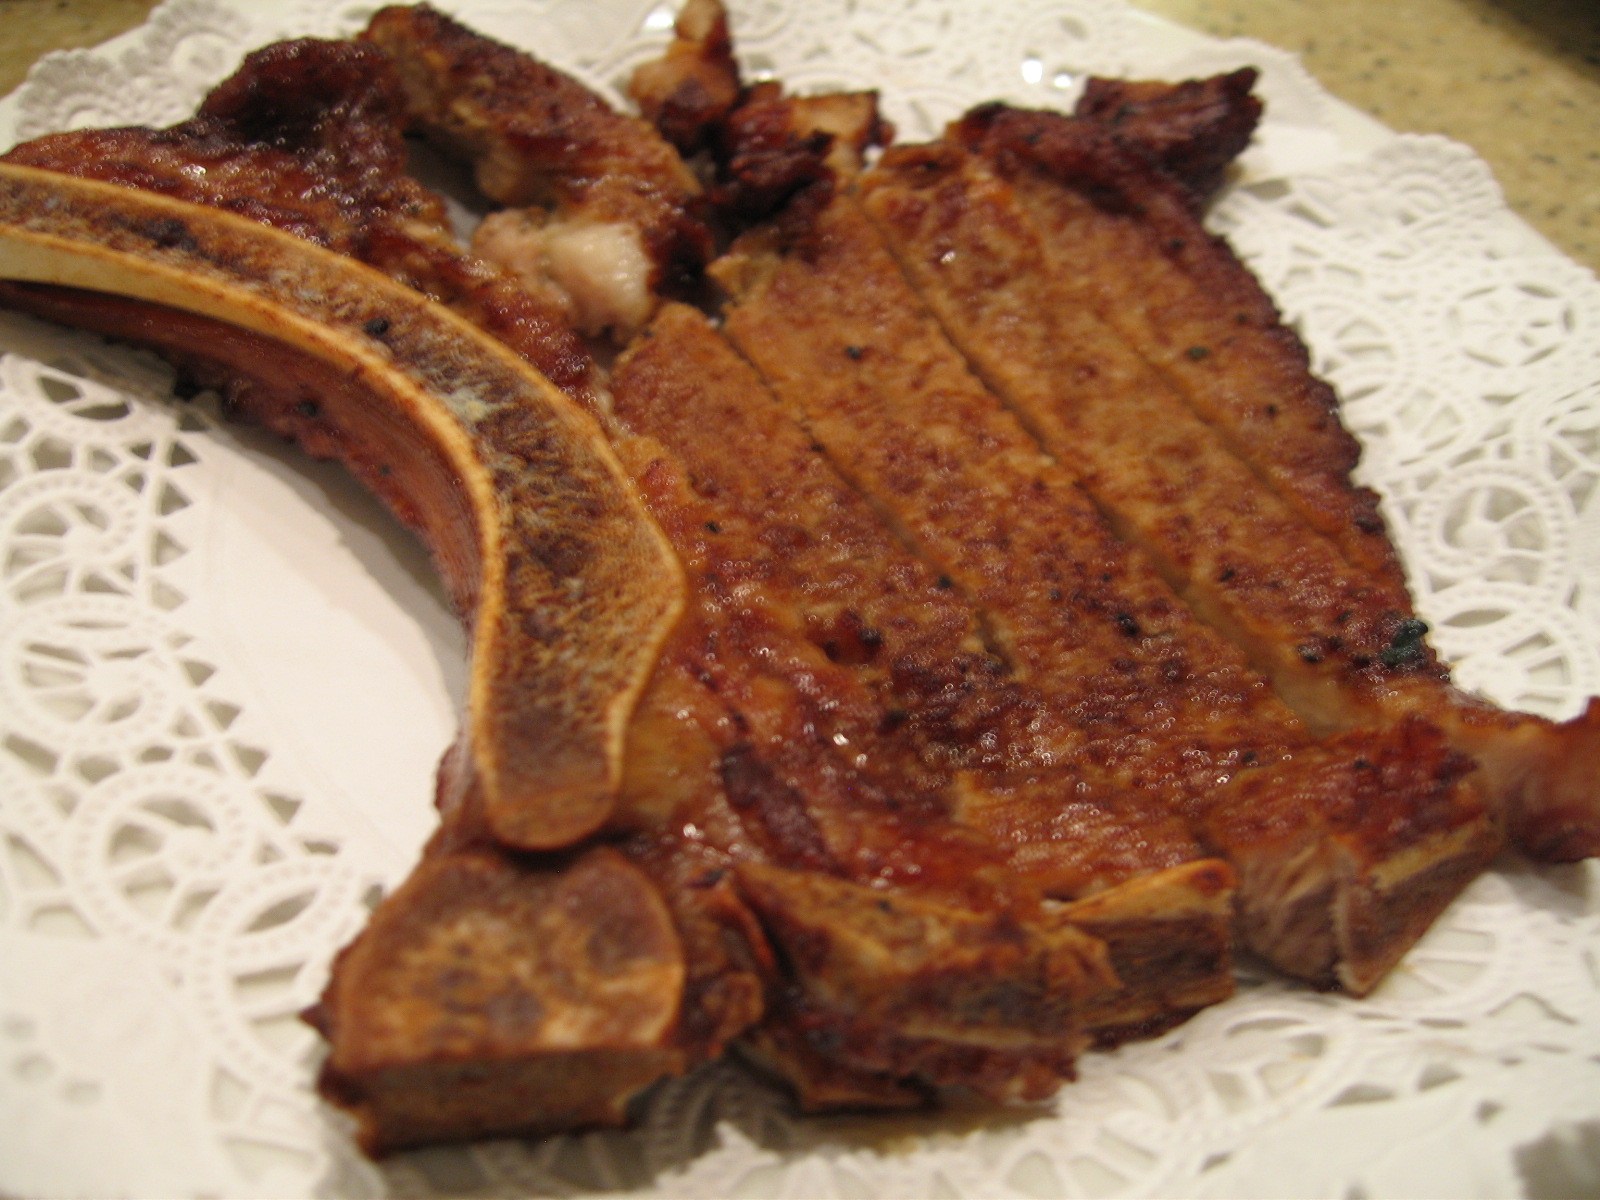 File:Fried pork chop by misocrazy at Din Tai Fung, Arcadia.jpg